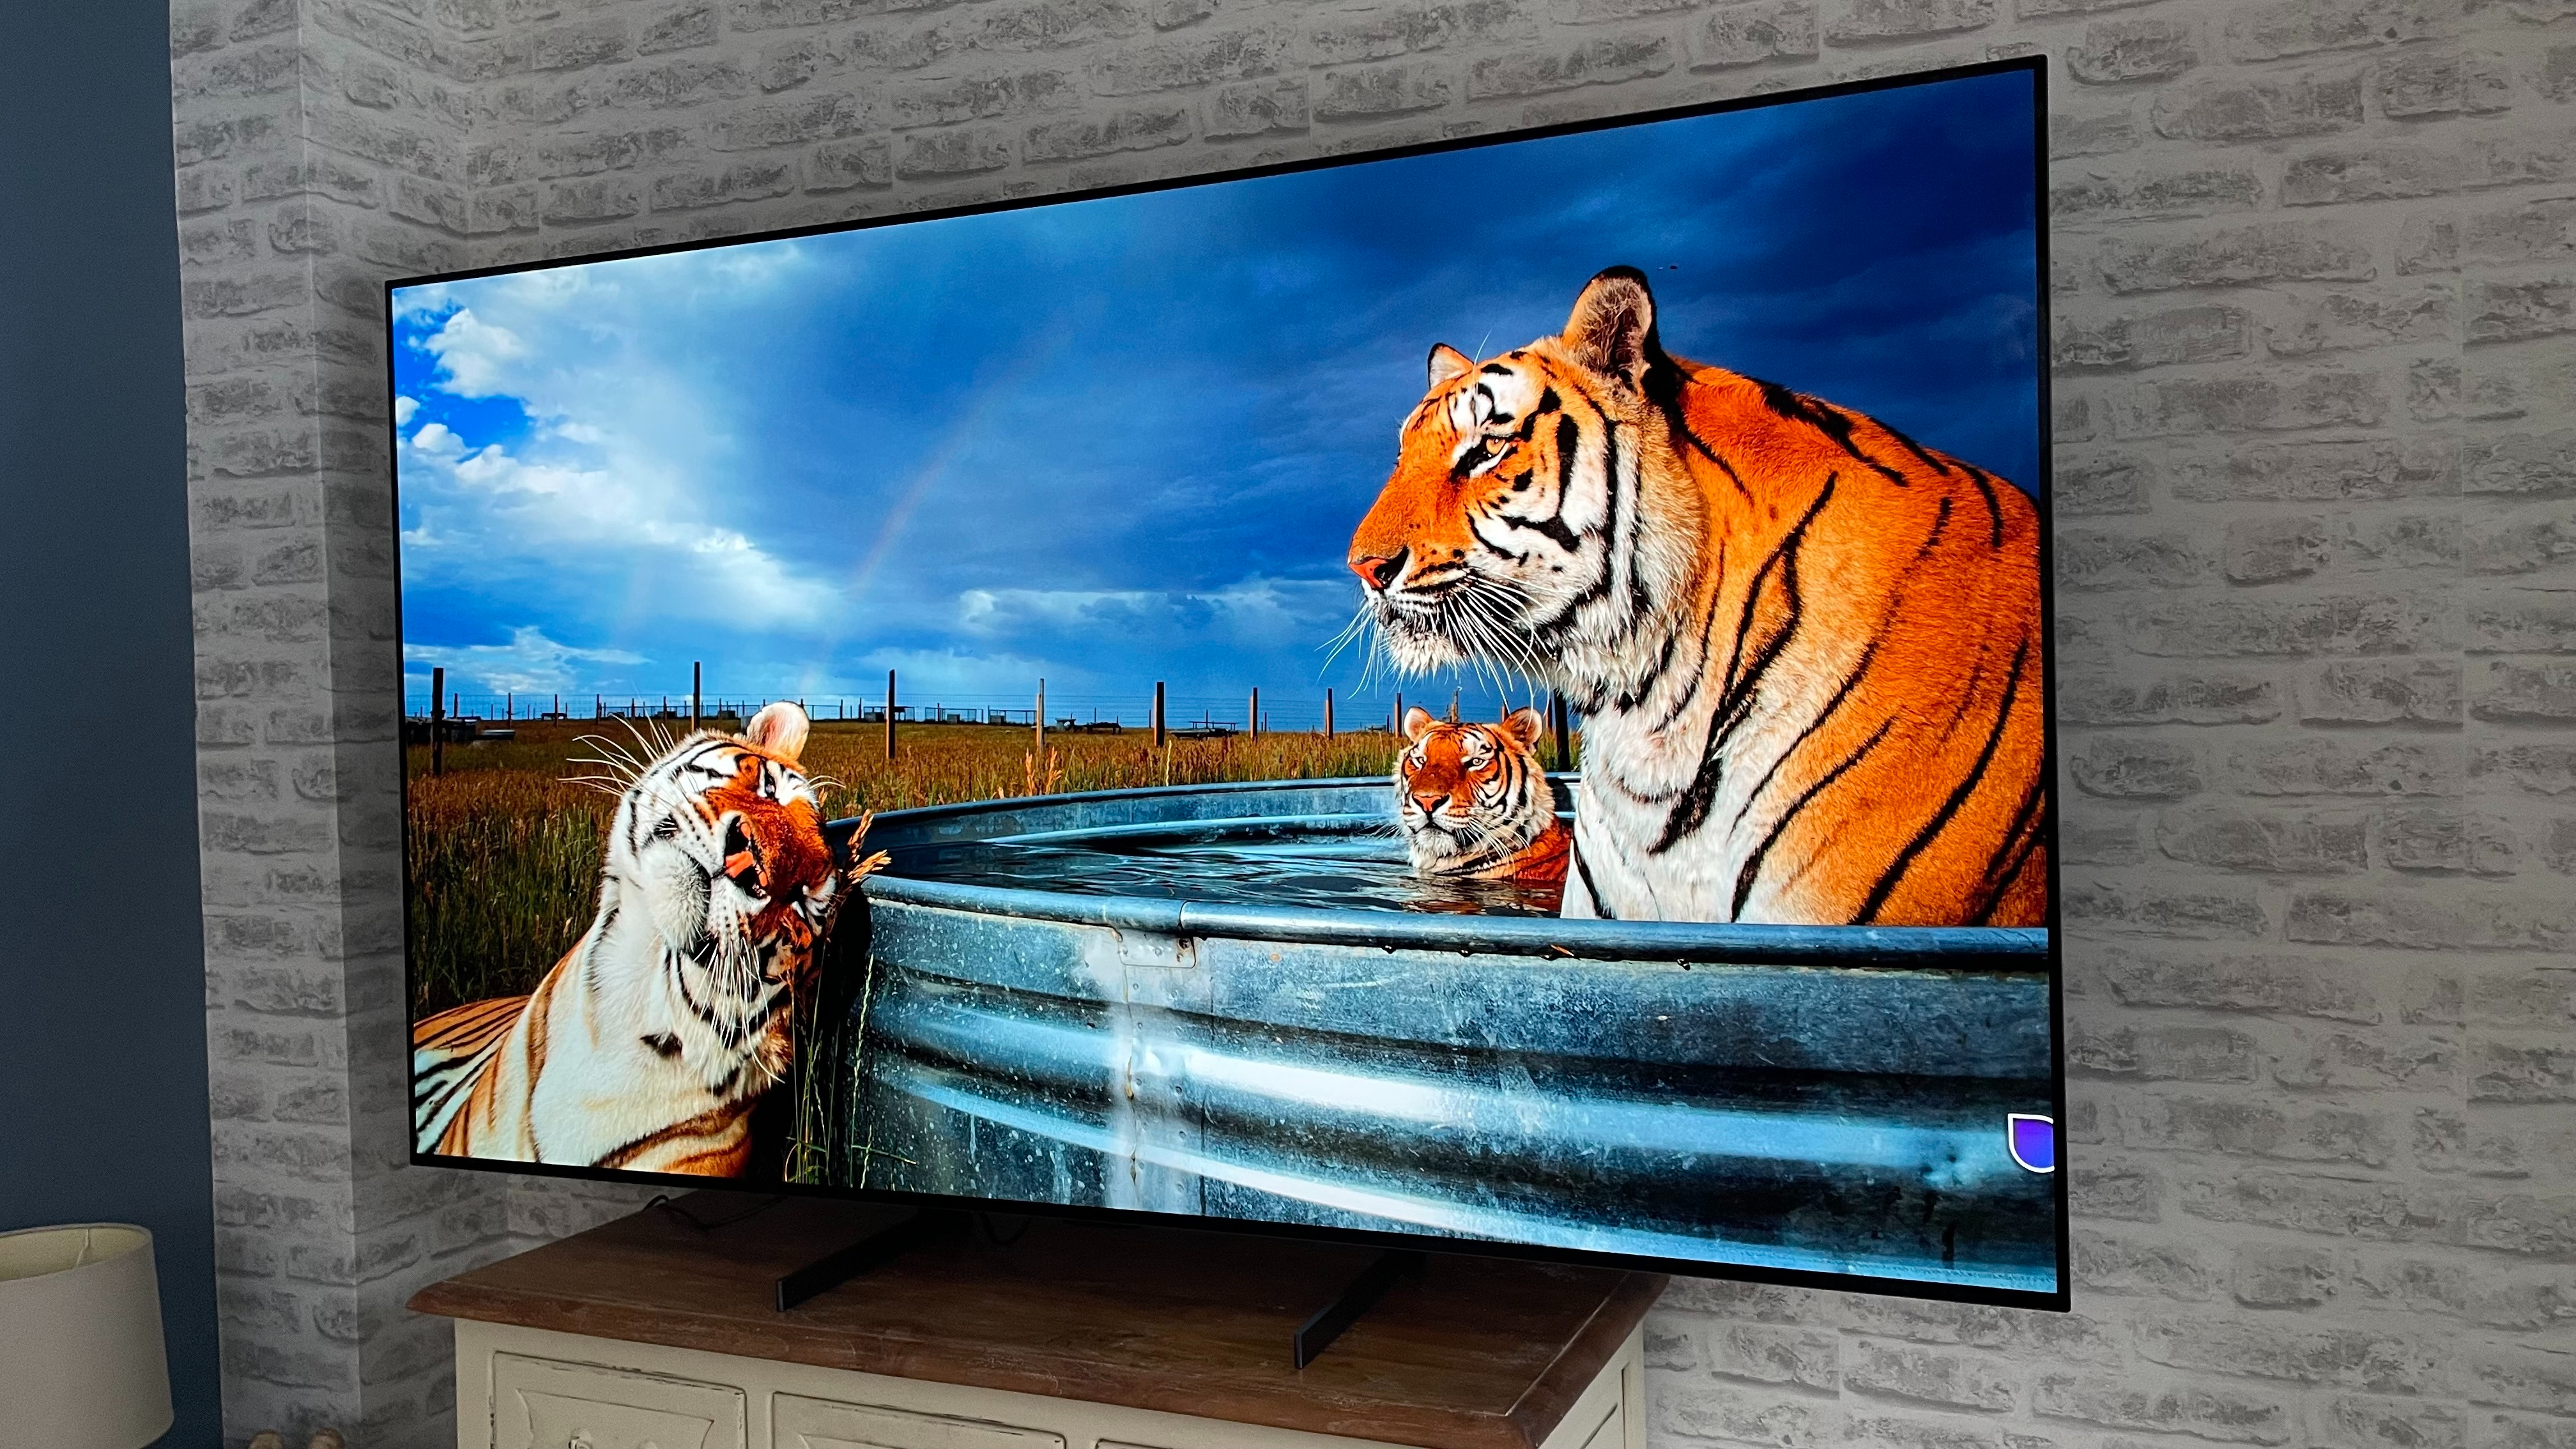 LG Z3 OLED TV showing image of tigers